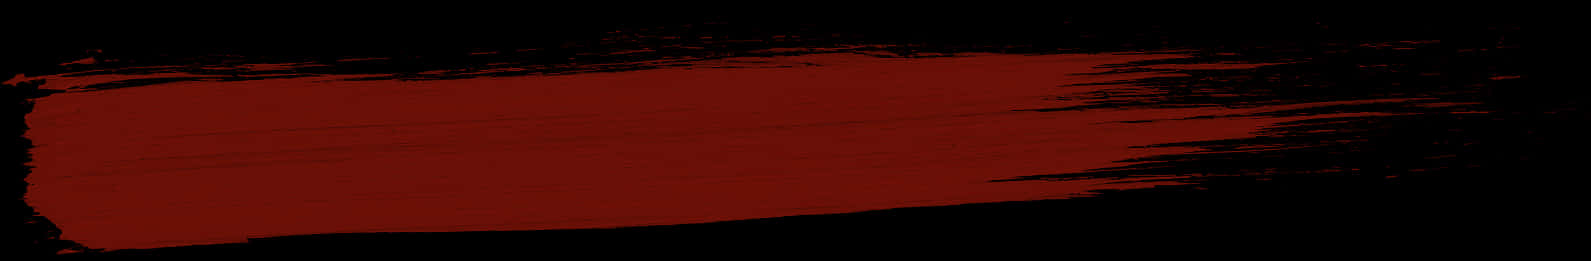 Abstract Red Brush Strokeon Black Background PNG